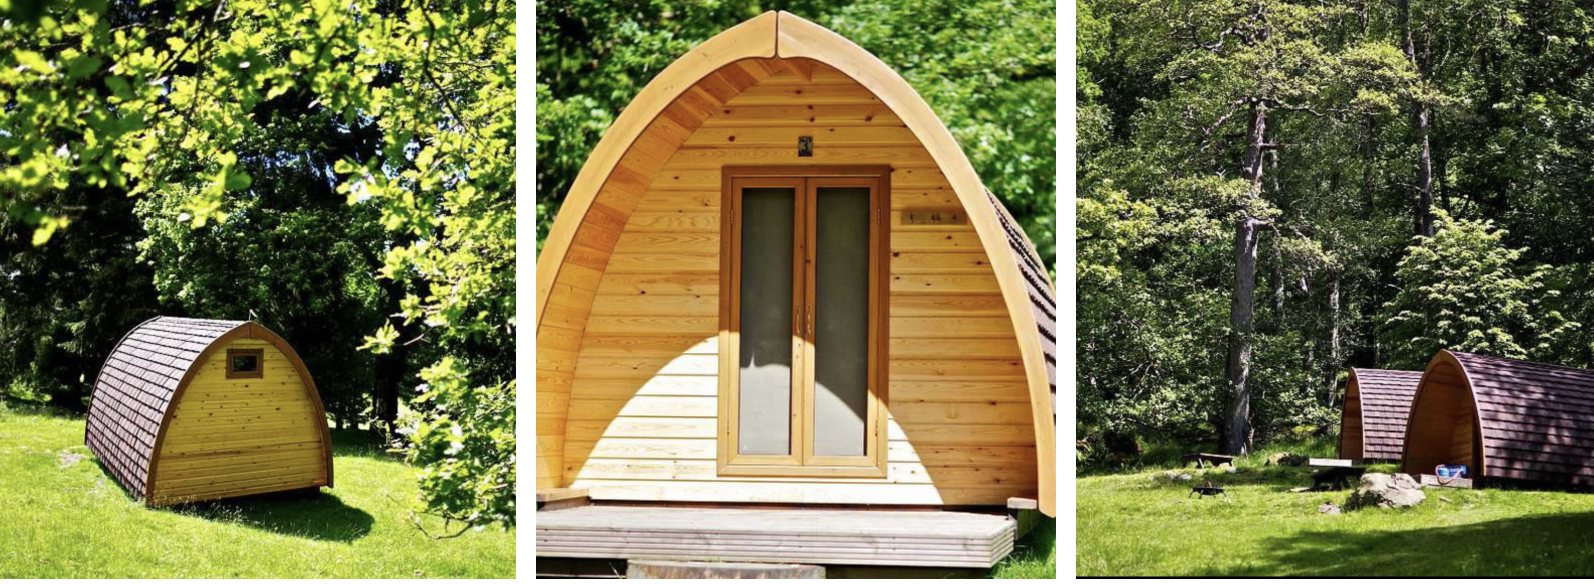 Eco camping pods at Rydal Hall Ambleside